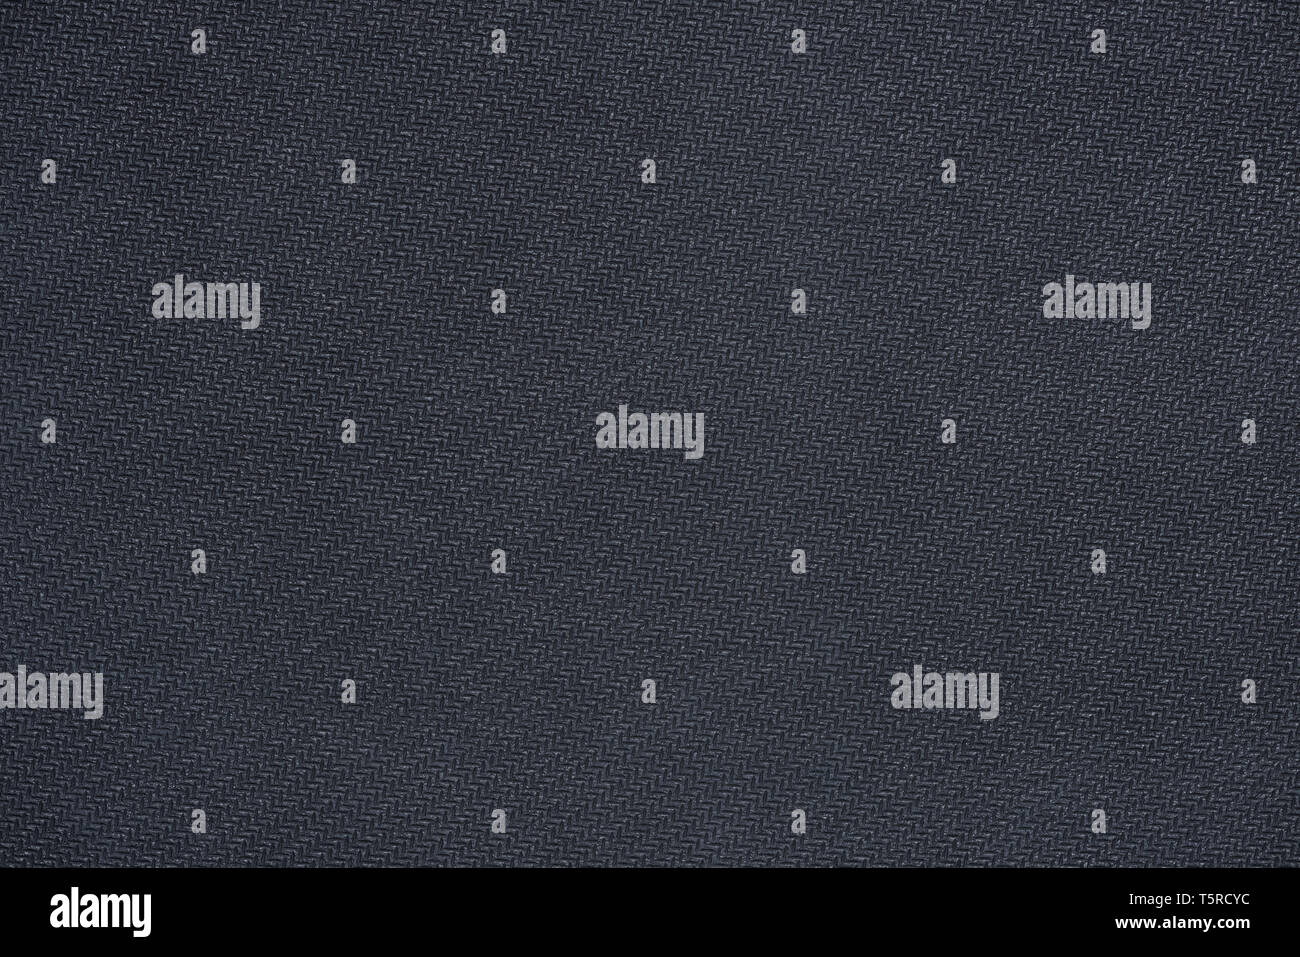 Clean highly detailed rubber bumpy non slip texture background Stock Photo